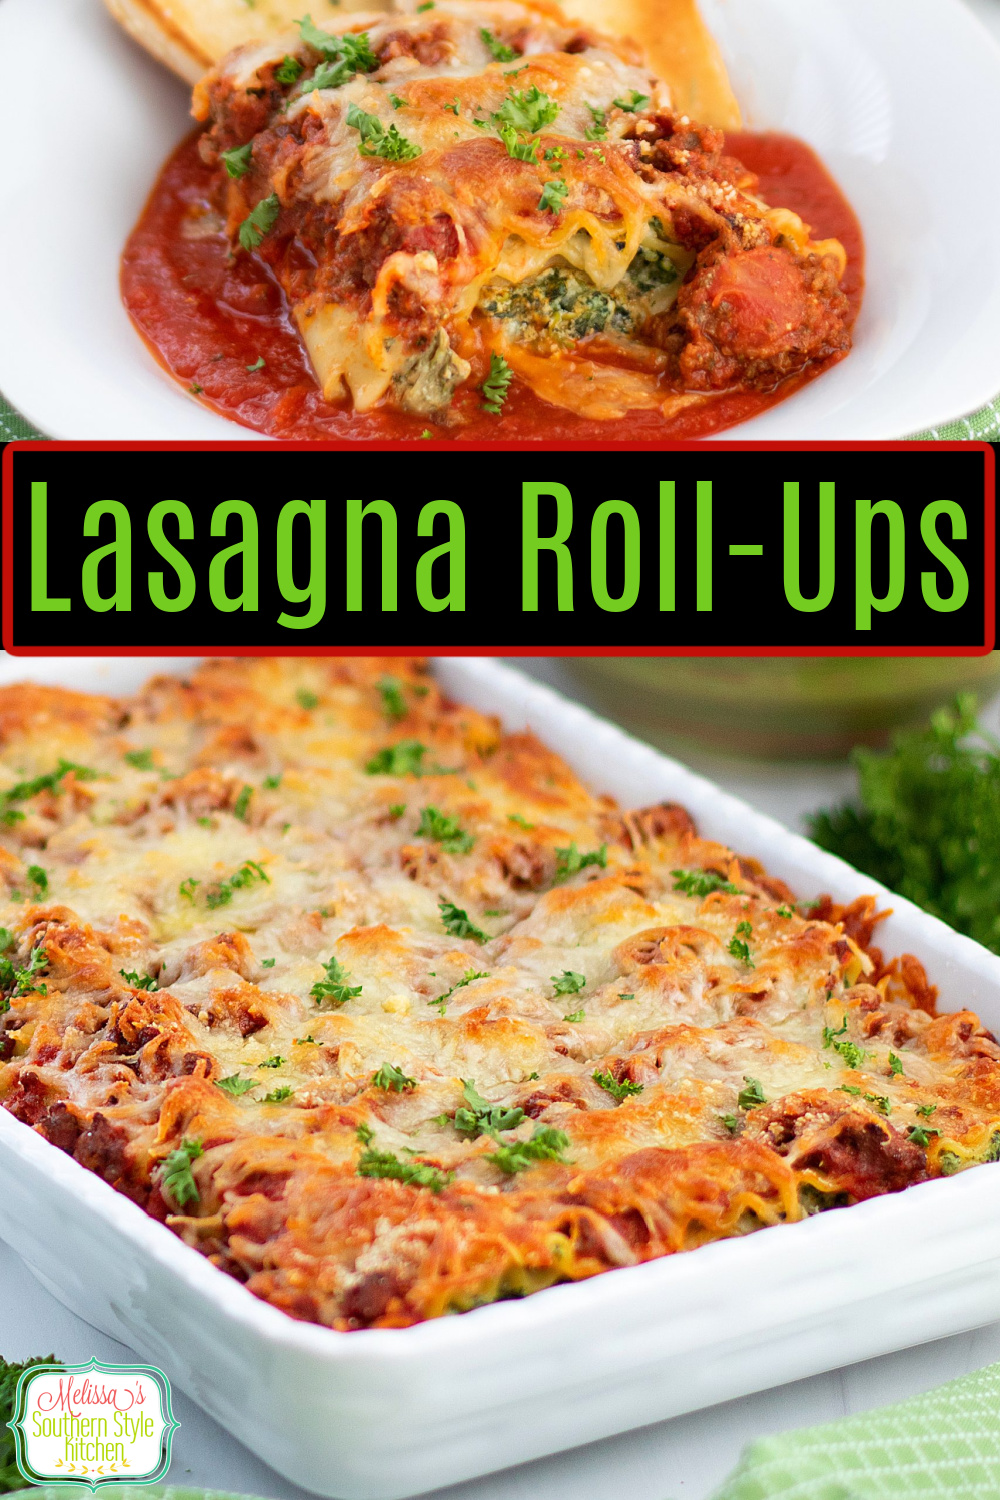 These easy Lasagna Roll-Ups feature a spinach and ricotta filling that are drizzled with a simple homemade meat sauce before baking #lasagna #lasaganrollups #rollupsrecipe #meatsauce #Italianfood #pastarecipes #homemadelasagna #spinach #bestlasagnarollupsrecipe via @melissasssk